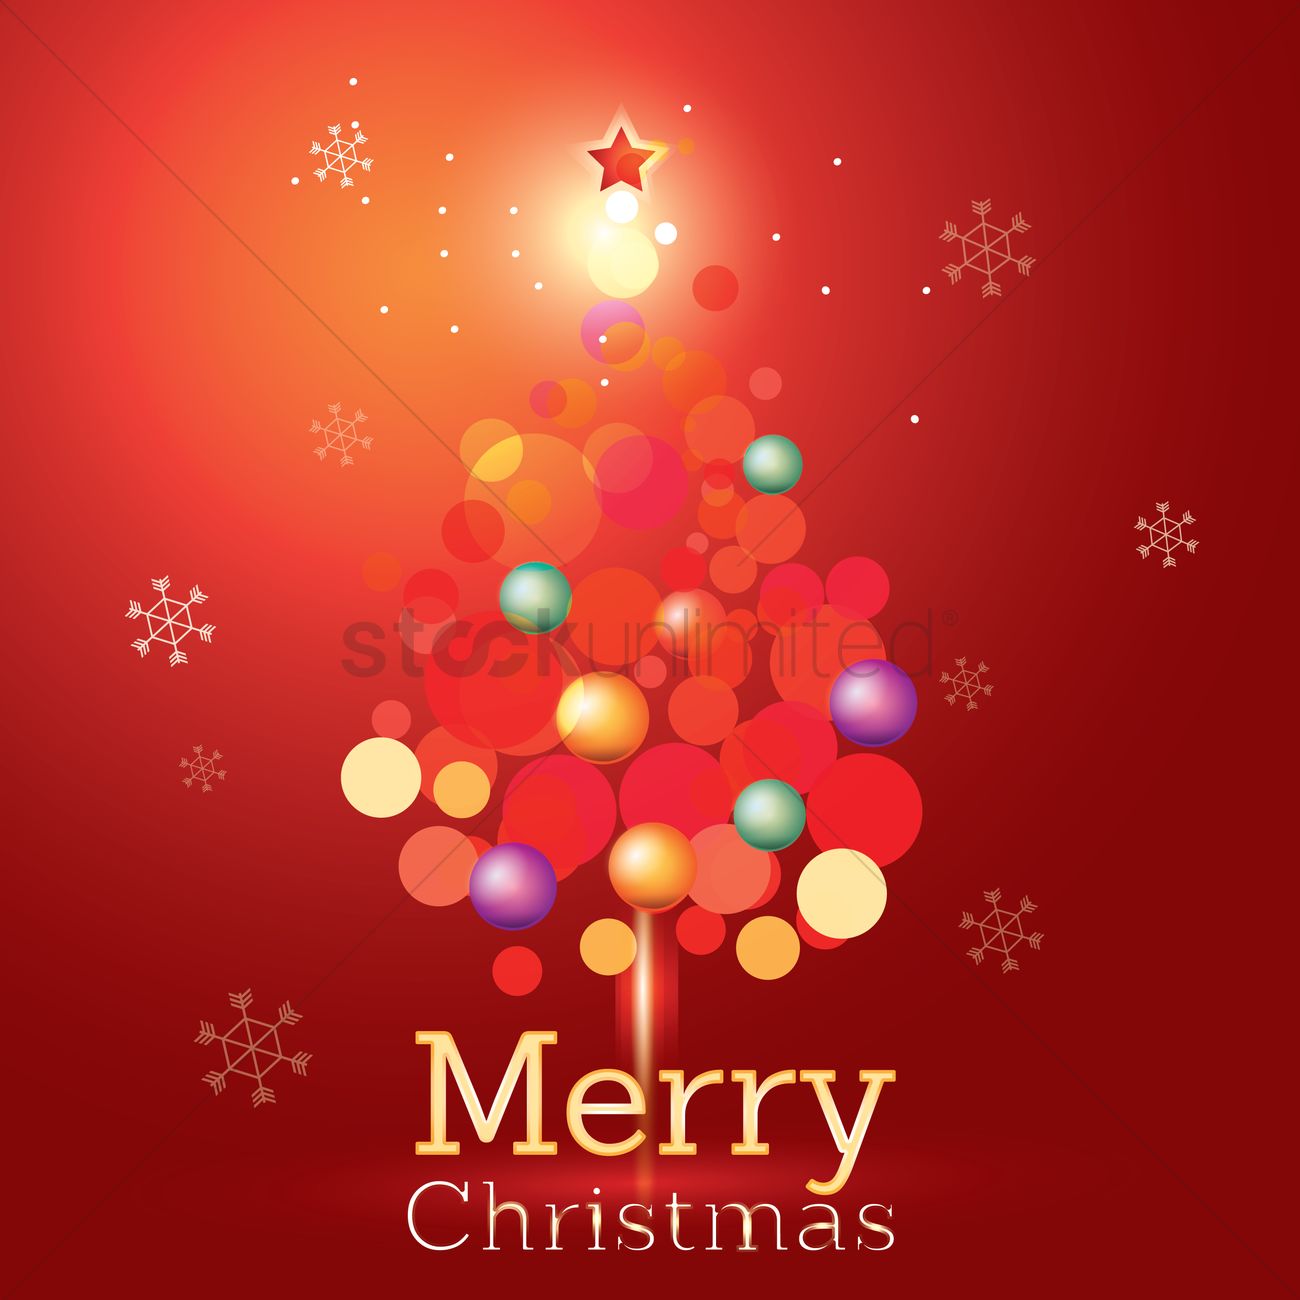 Merry Christmas Wallpaper Vector Image Stockunlimited